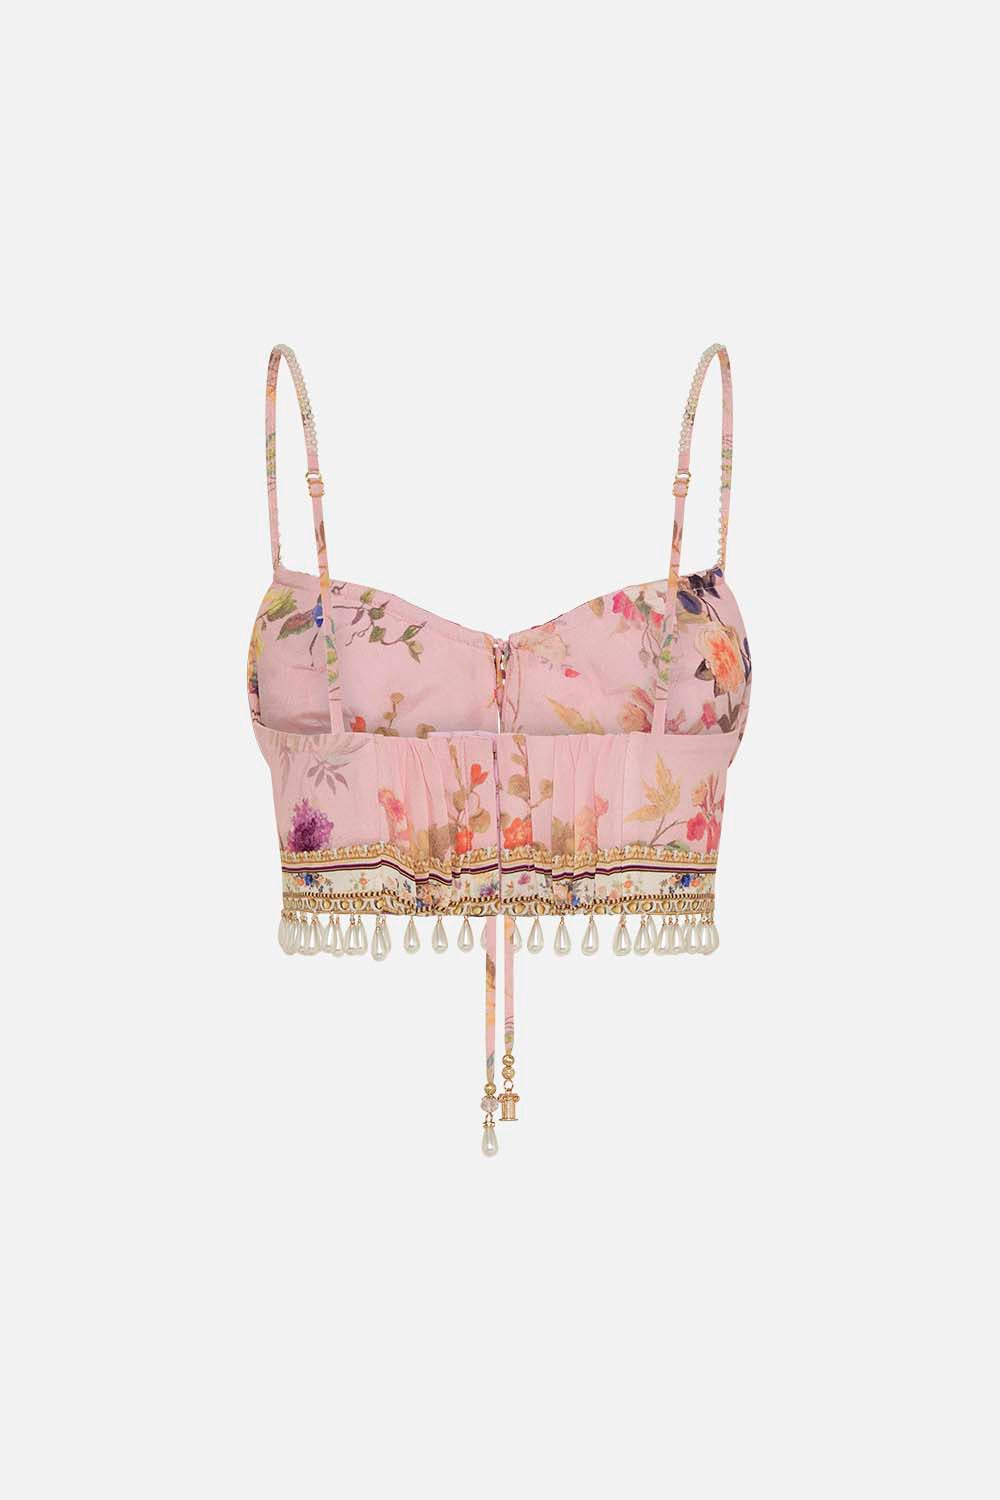 Kmart Australia - Treat yourself to something light and breezy. Add a pop  of pink under a summer cami or lounge around the house in style with our $8  strappy bralette.